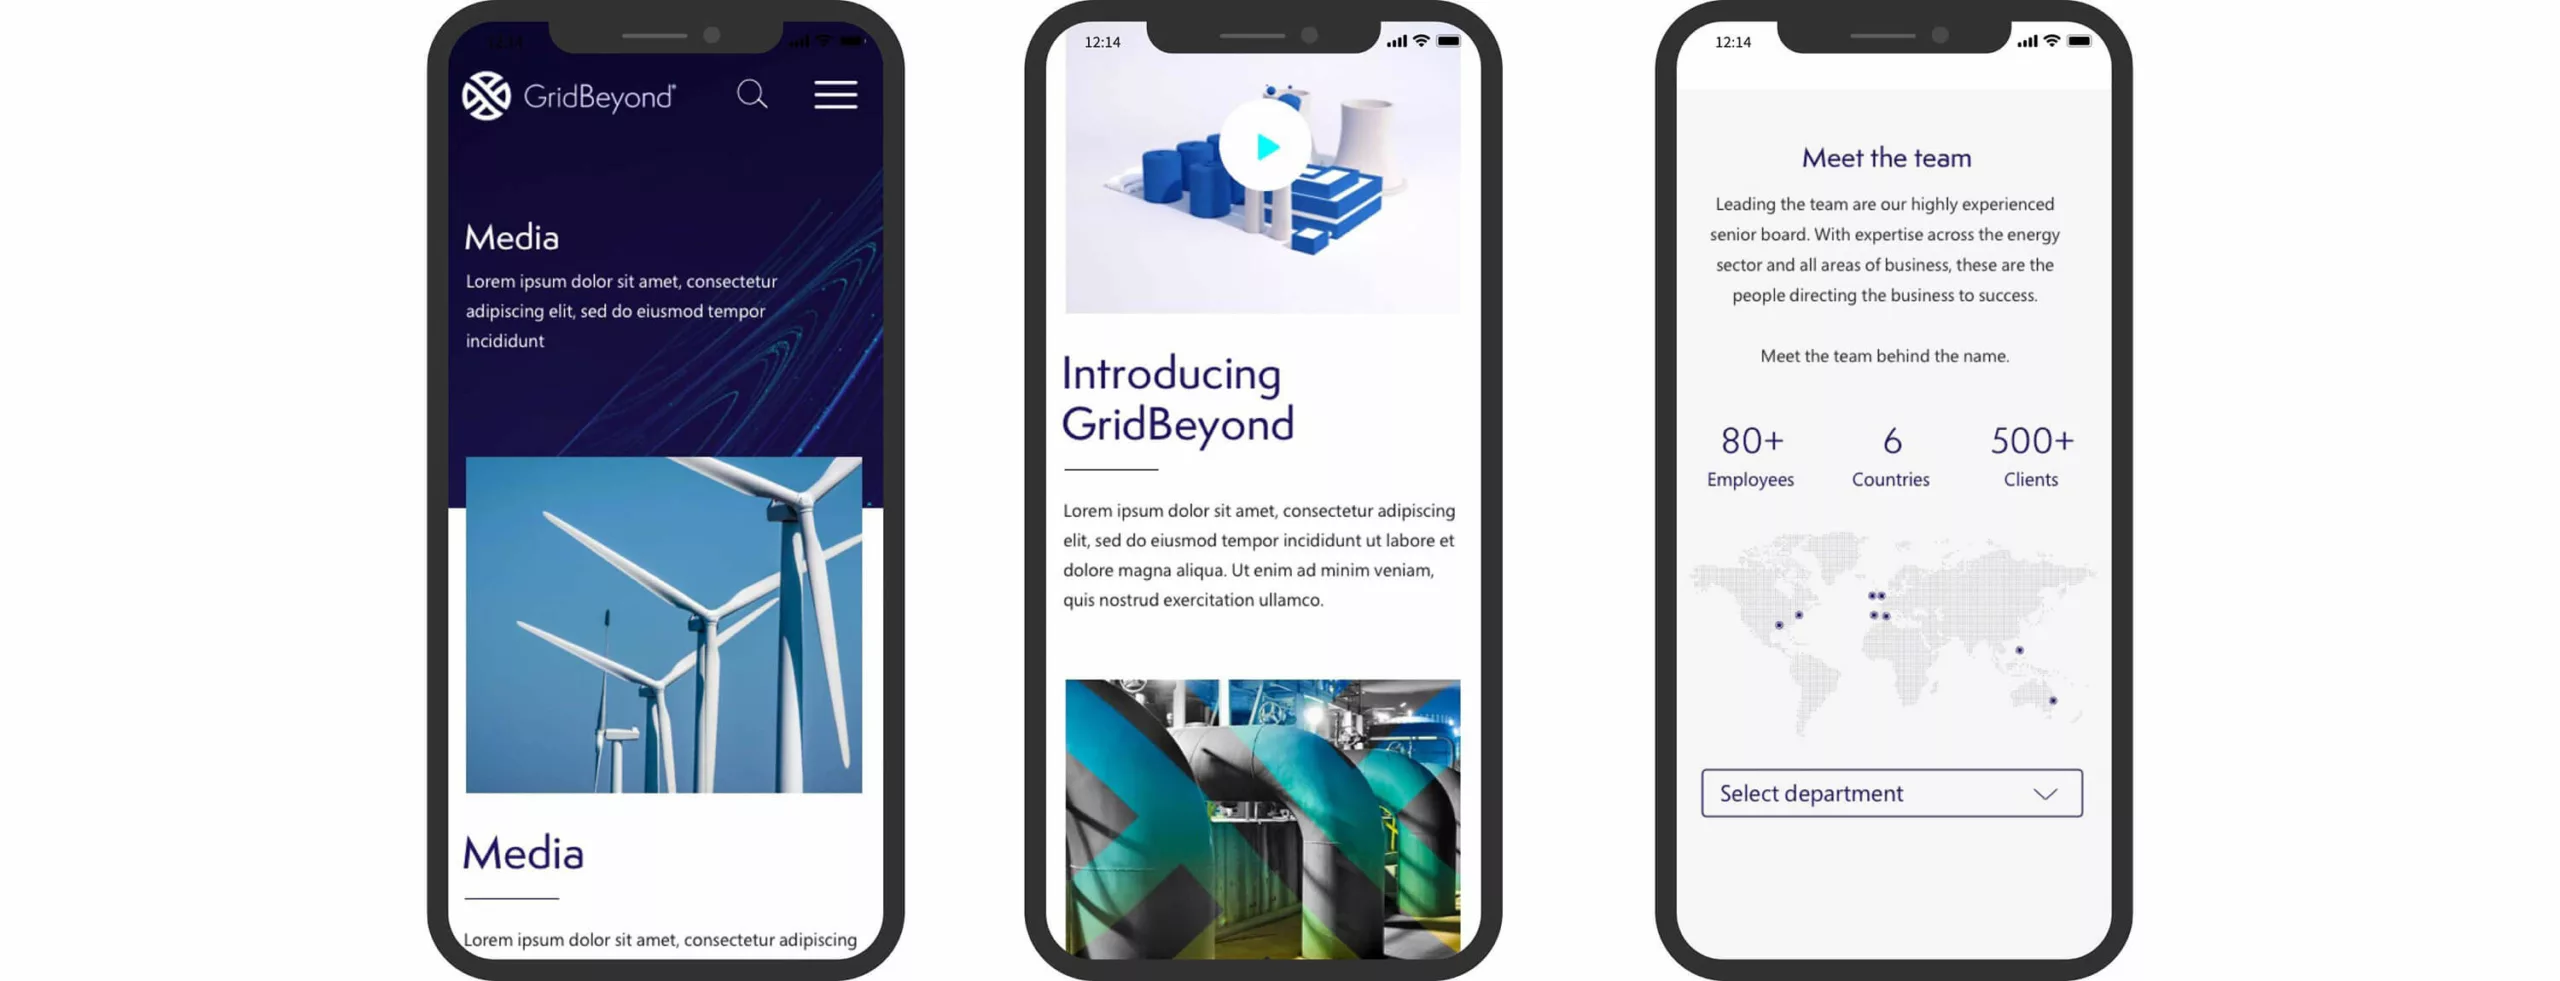 Three mobile phones showing GridBeyond website design